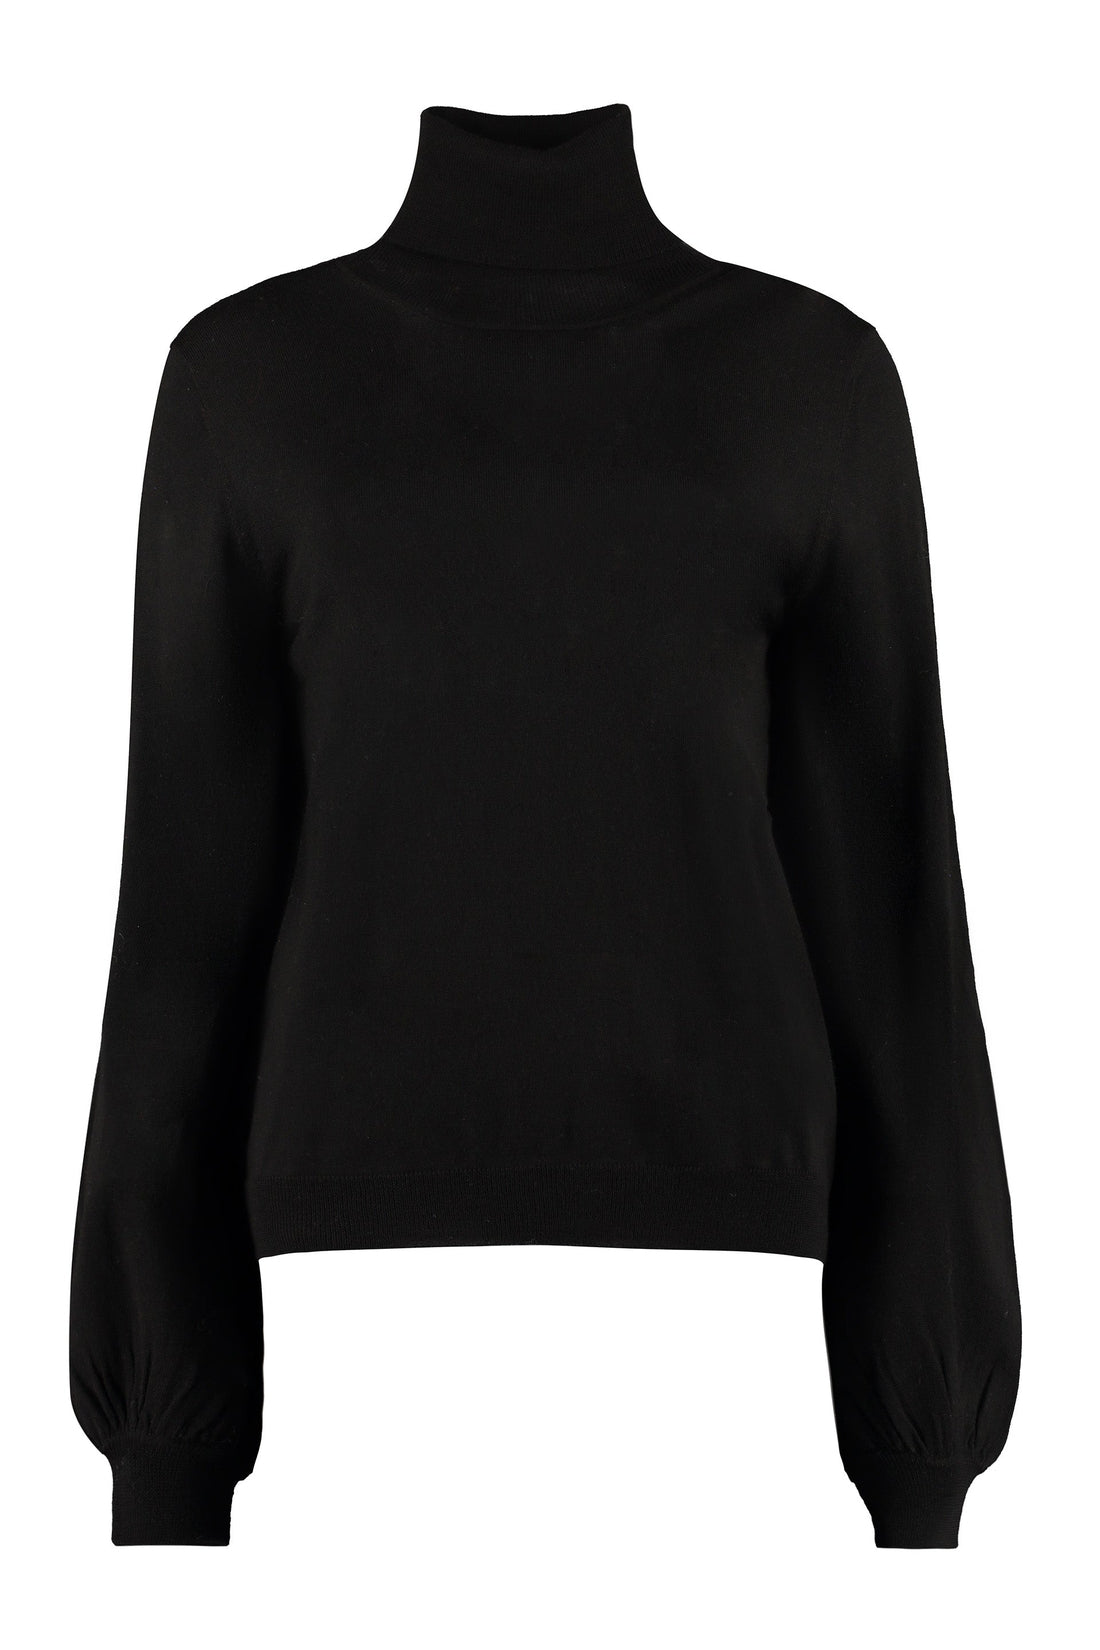 Parosh-OUTLET-SALE-Lulyx wool and cachemire turtleneck pullover-ARCHIVIST